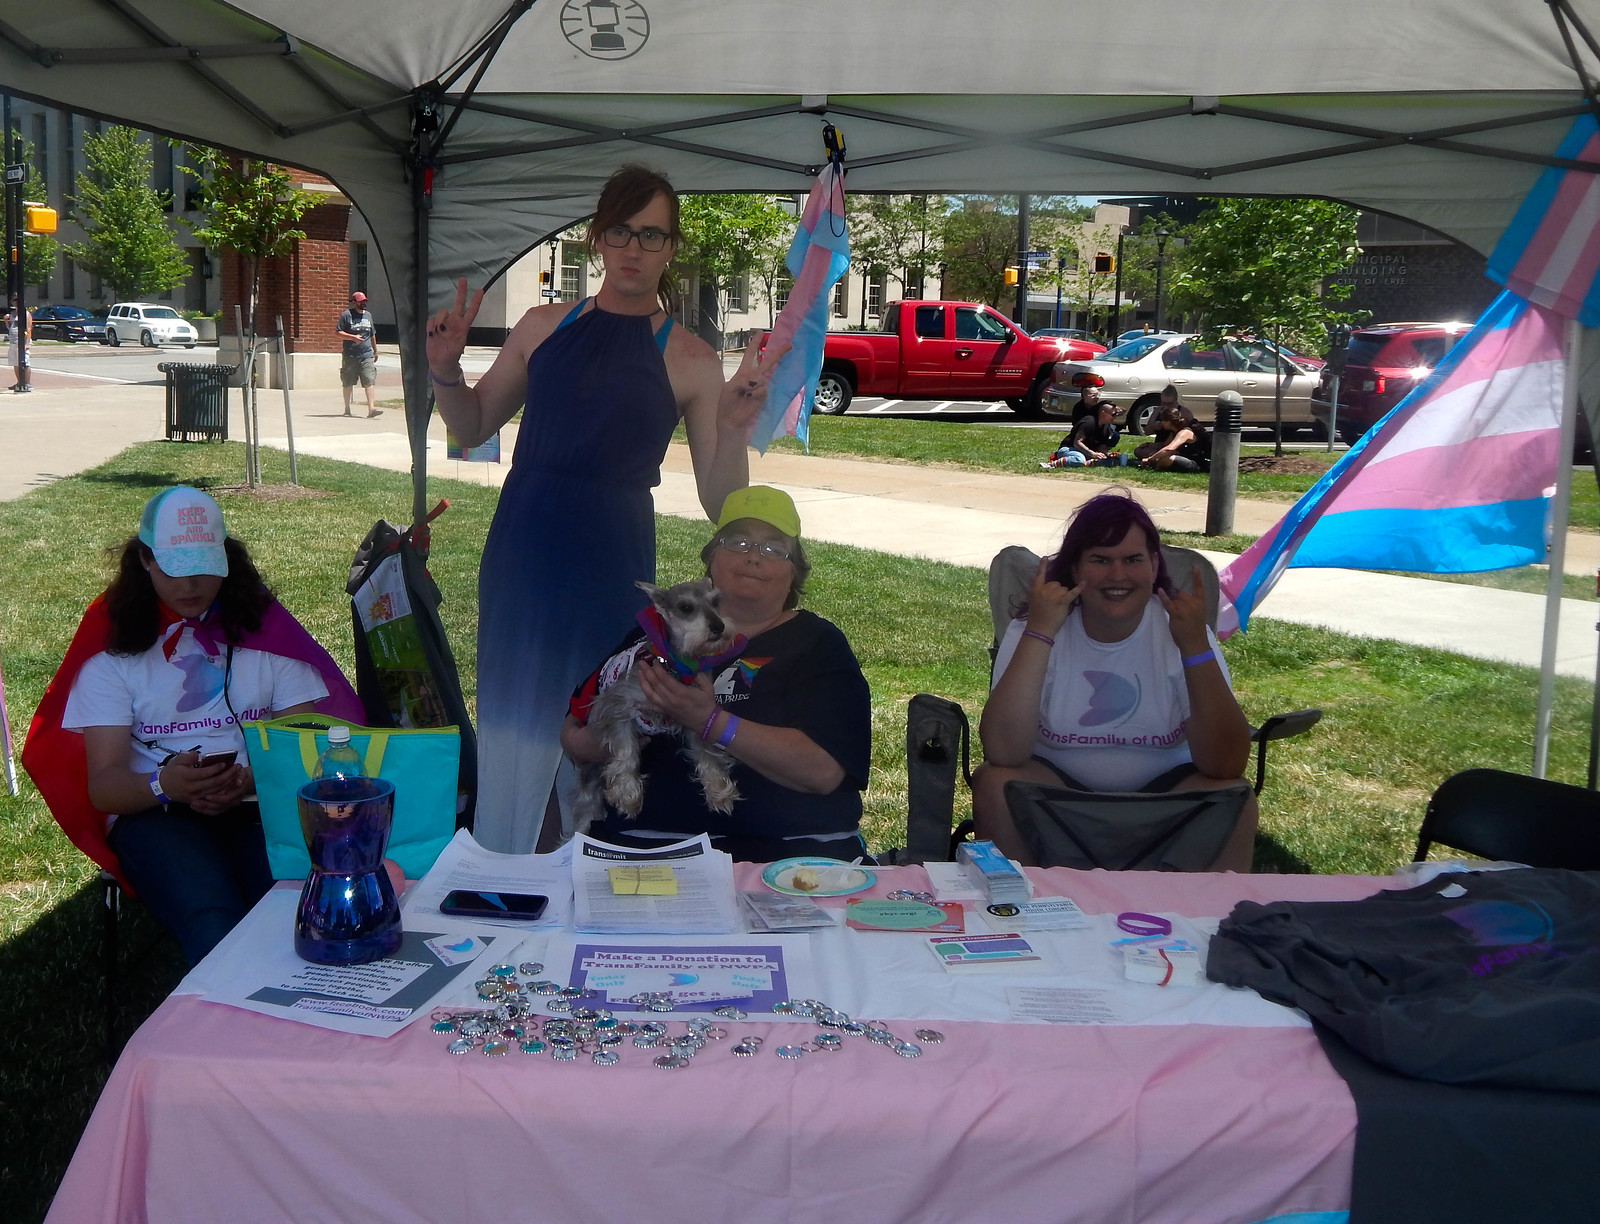 TransFamily of NW PA table at Pride Fest